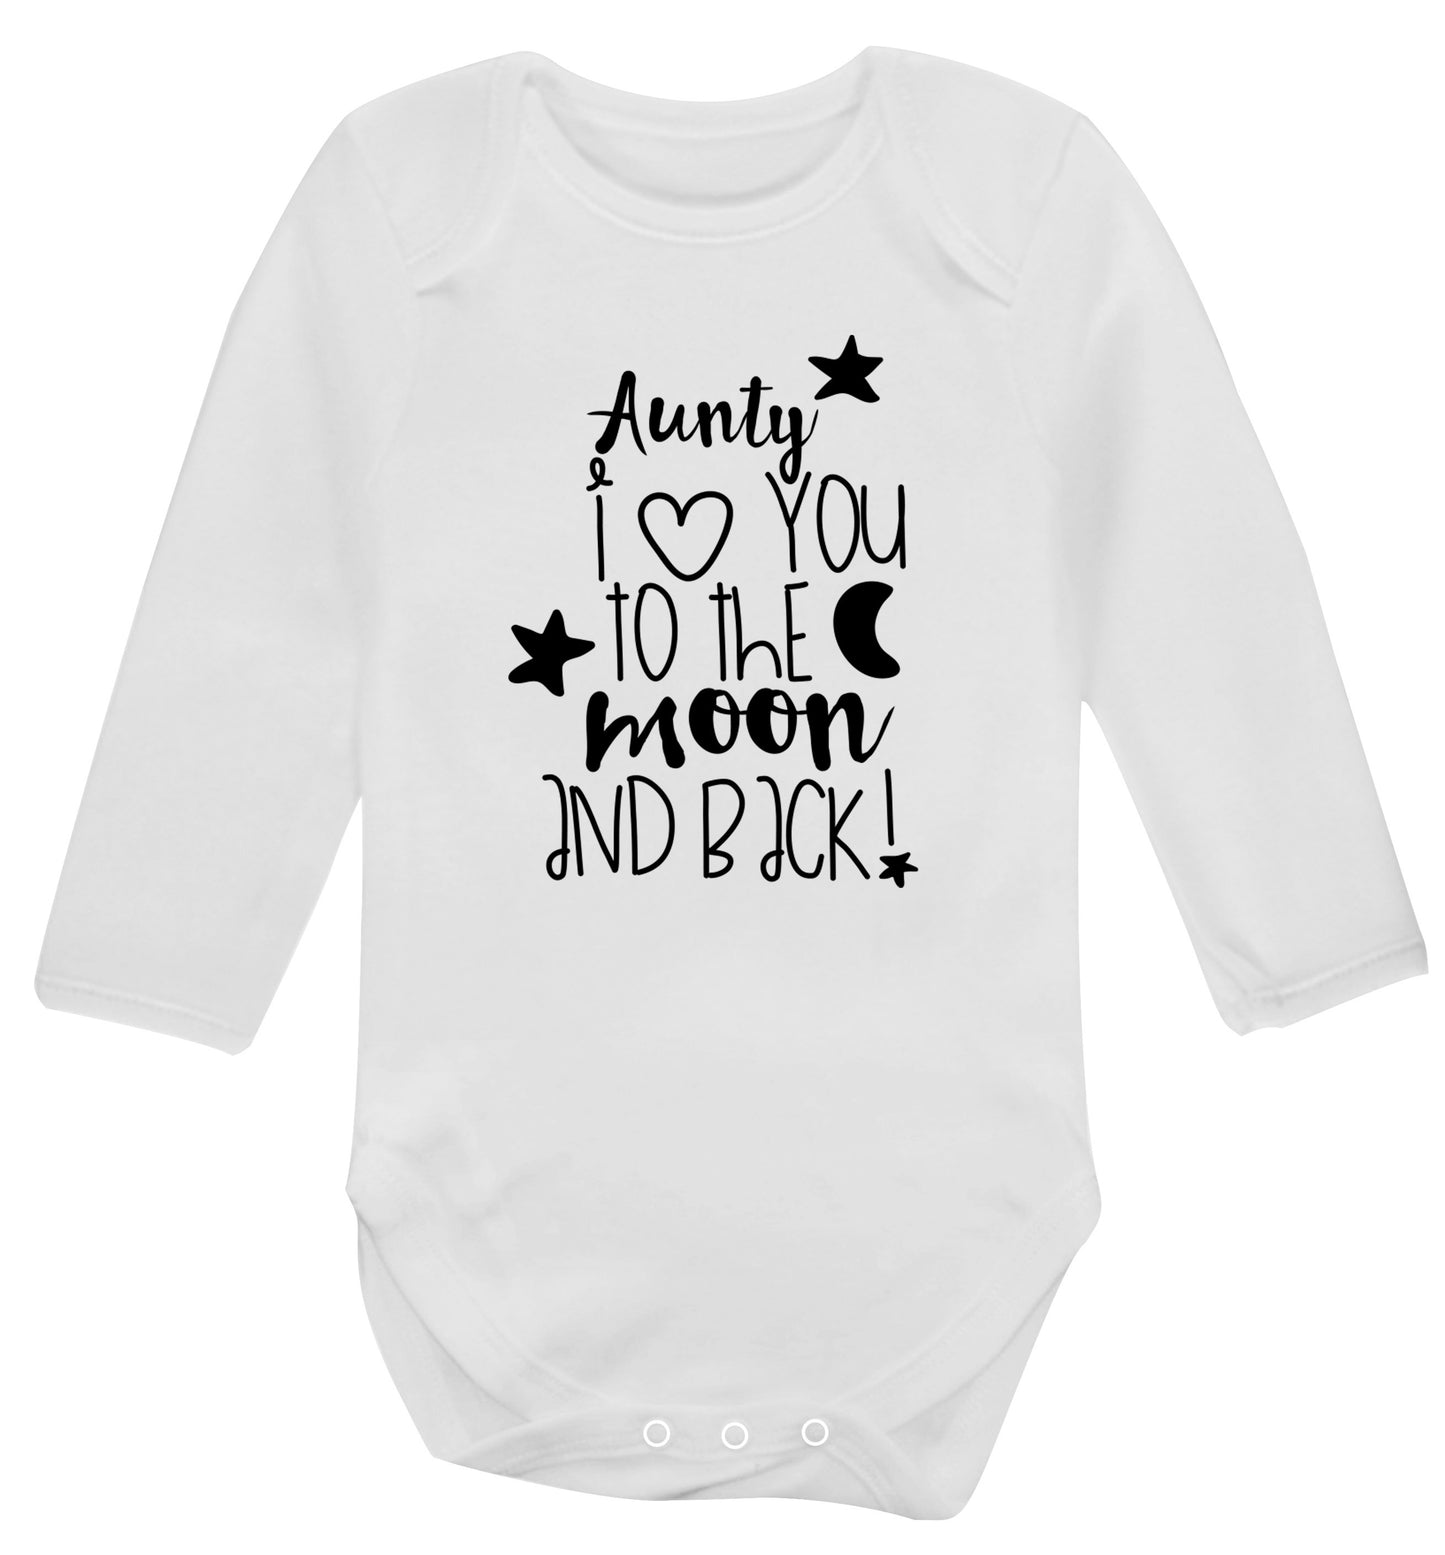 Aunty I love you to the moon and back Baby Vest long sleeved white 6-12 months